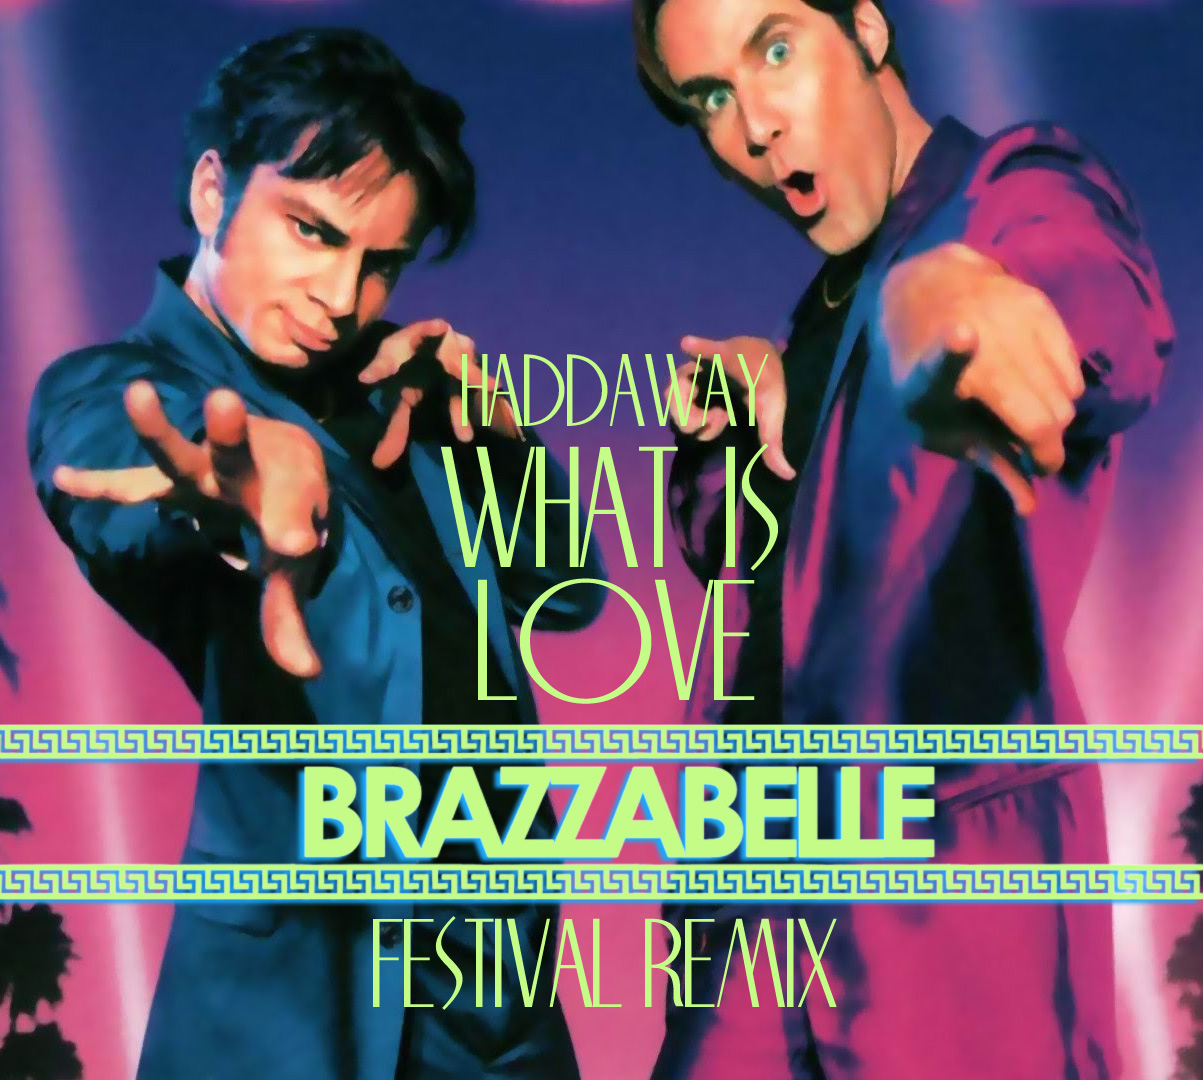 Haddaway What Is Love Brazzabelle Festival Remix